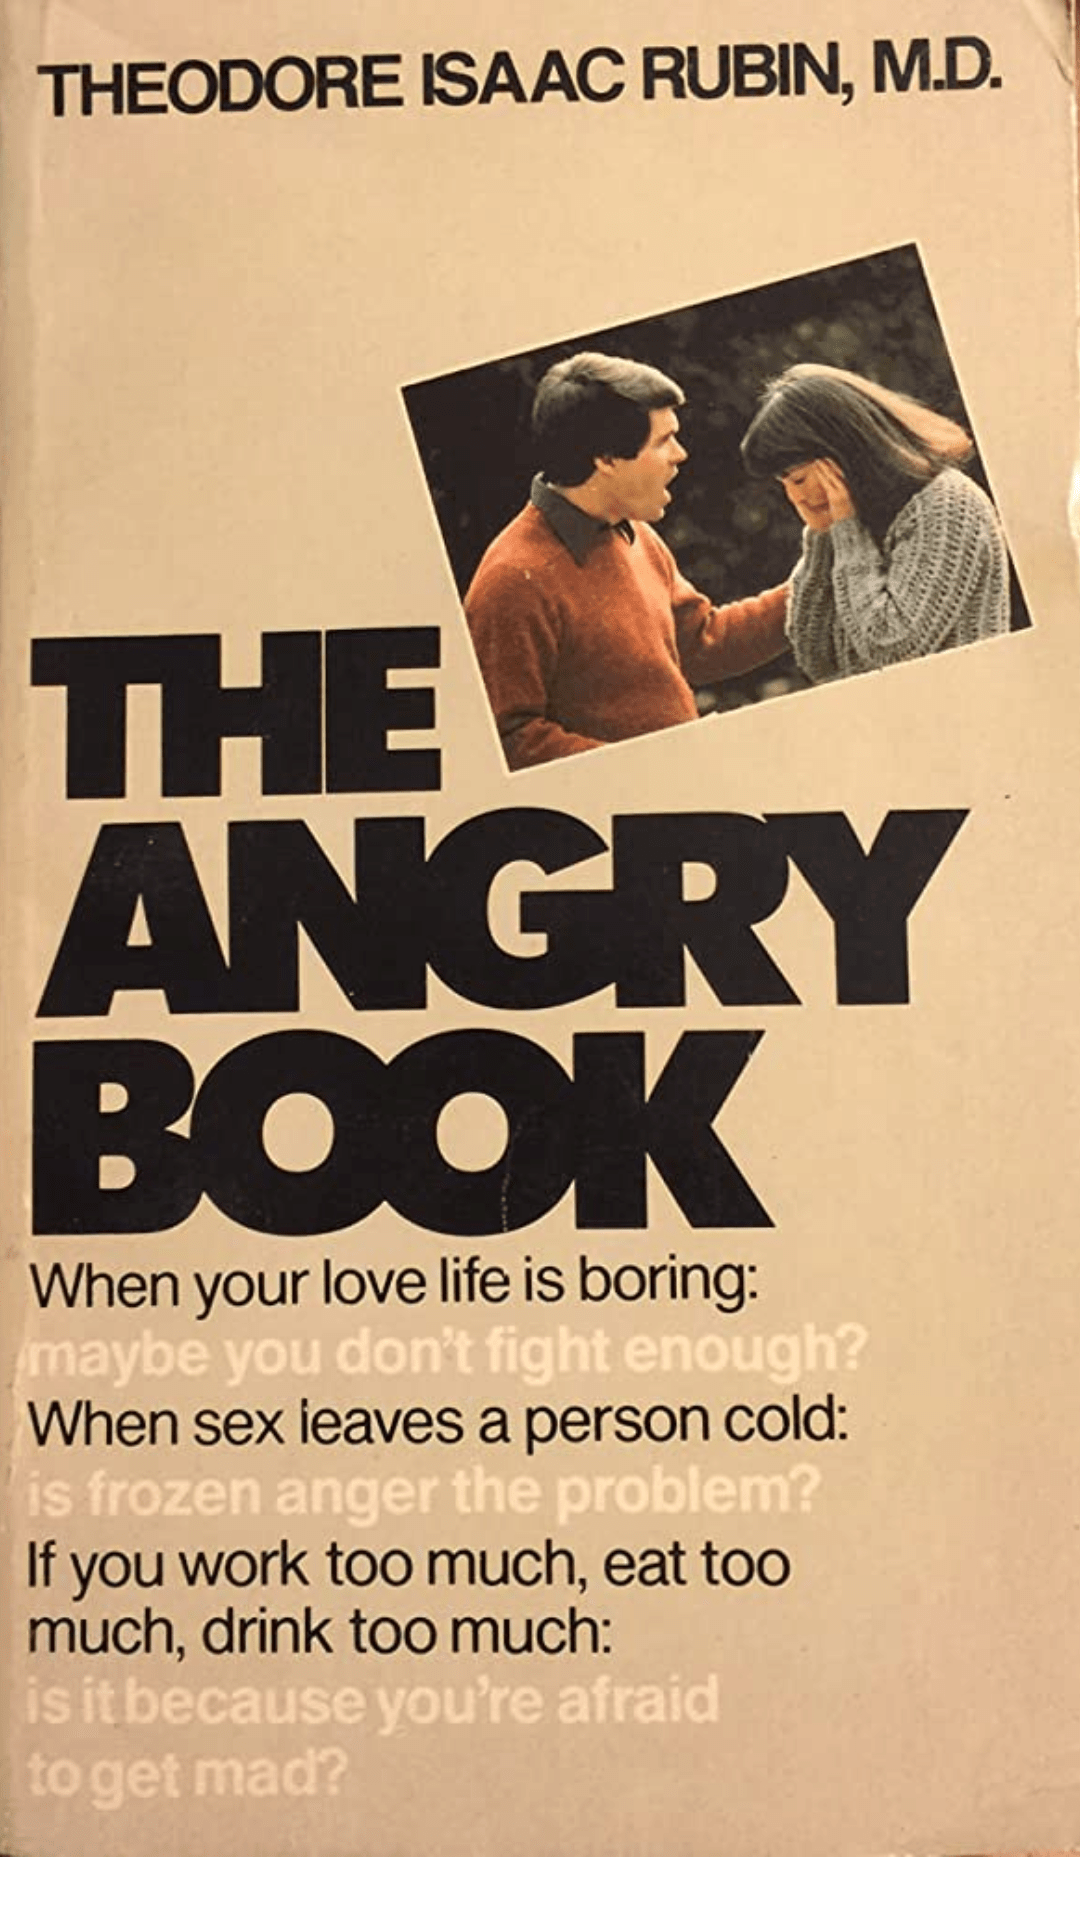 The Angry Book by Theodore Isaac Rubin